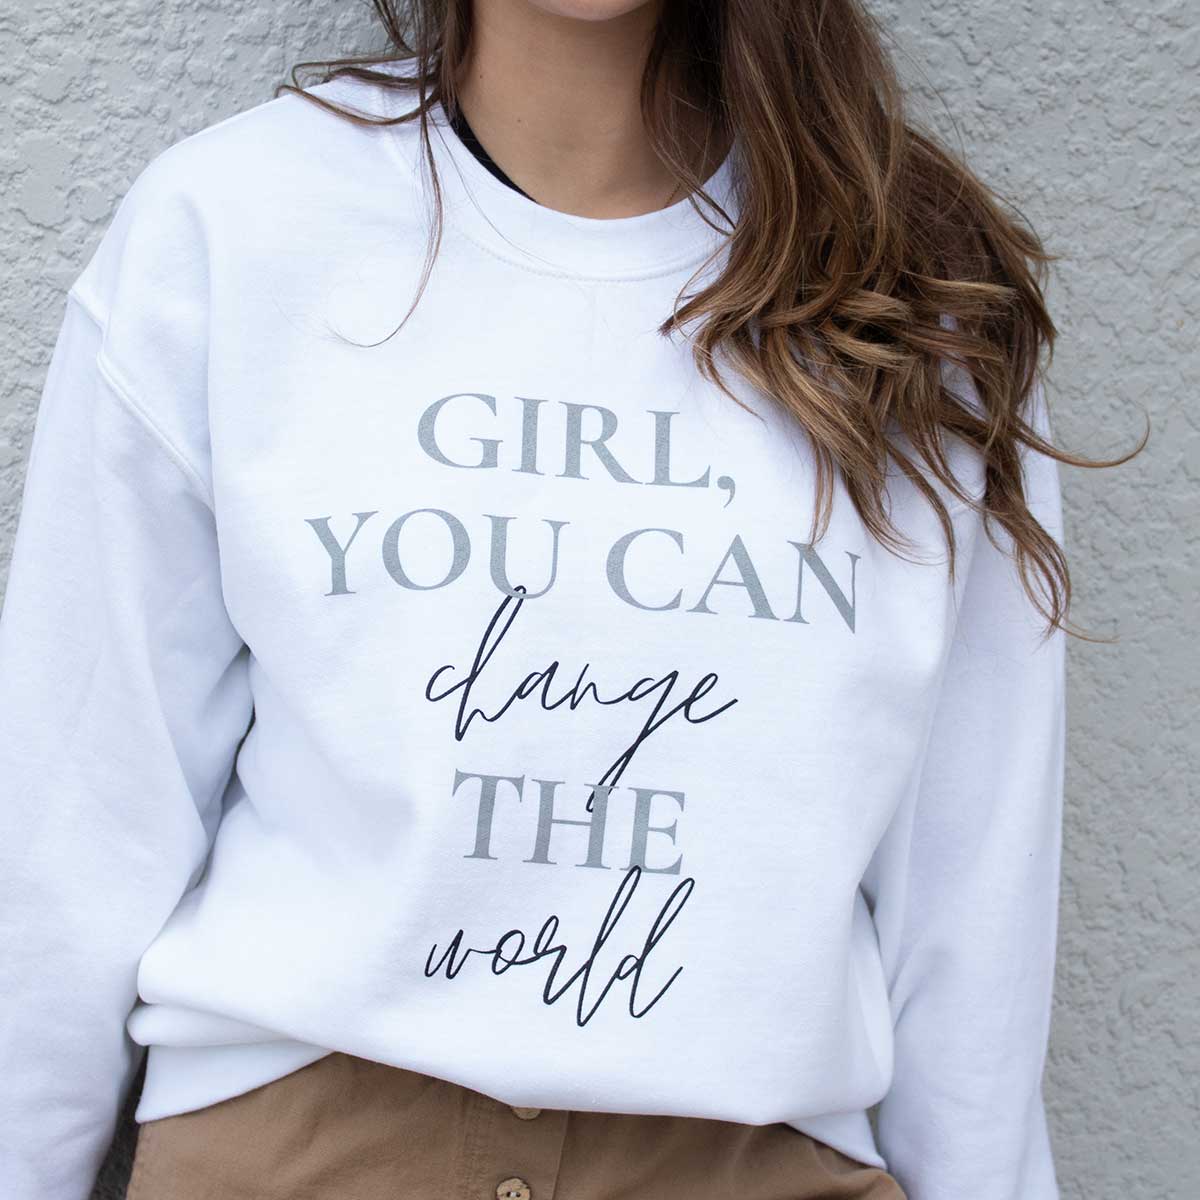 Sweatshirt for sale that reads "Girl, you can change the world"